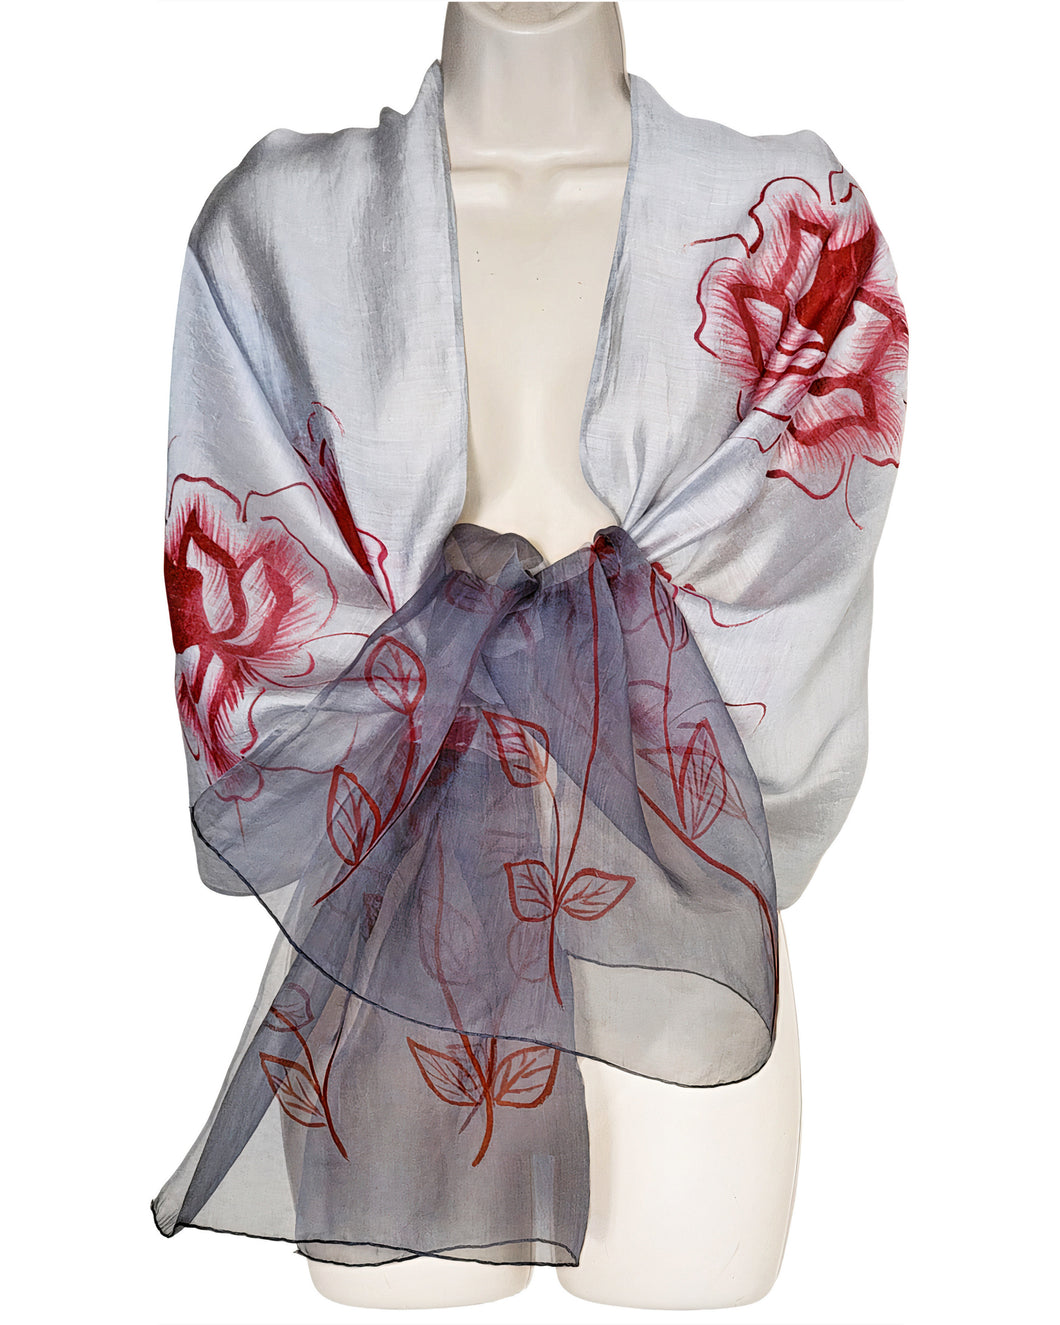 Corsica (Gray with Red Flowers) Scarf